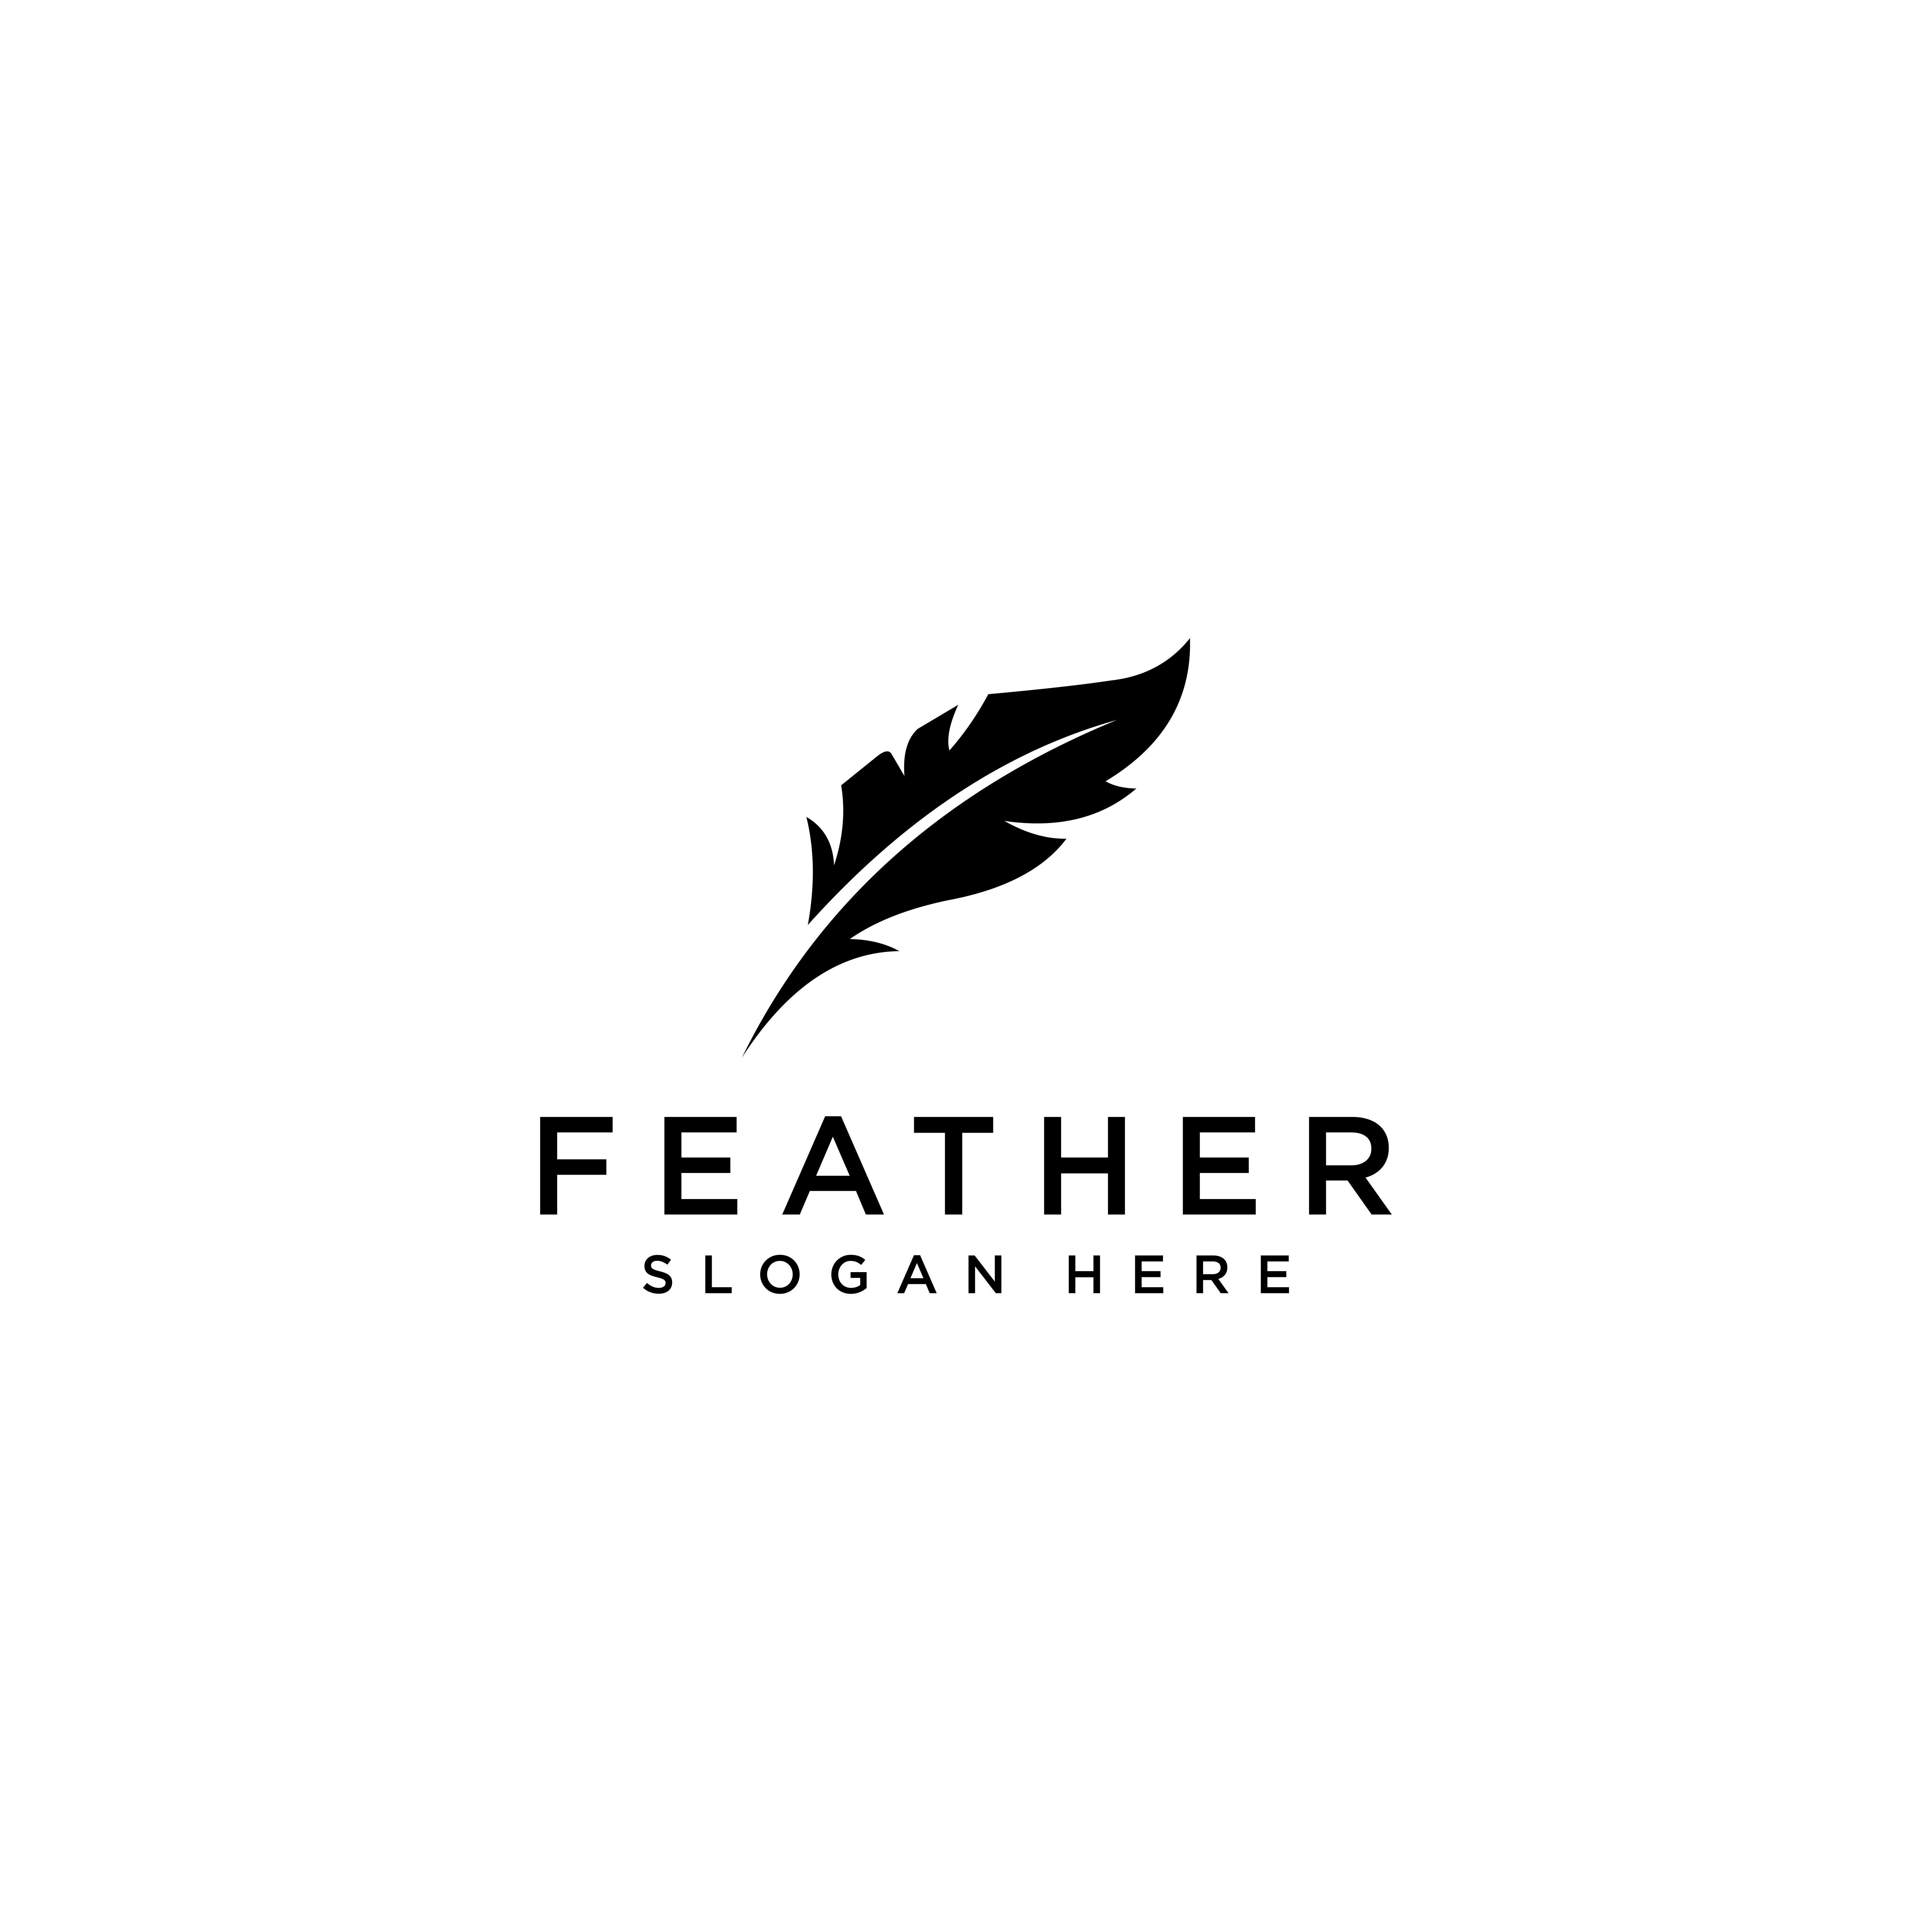 feather silhouette vector design template preview image.